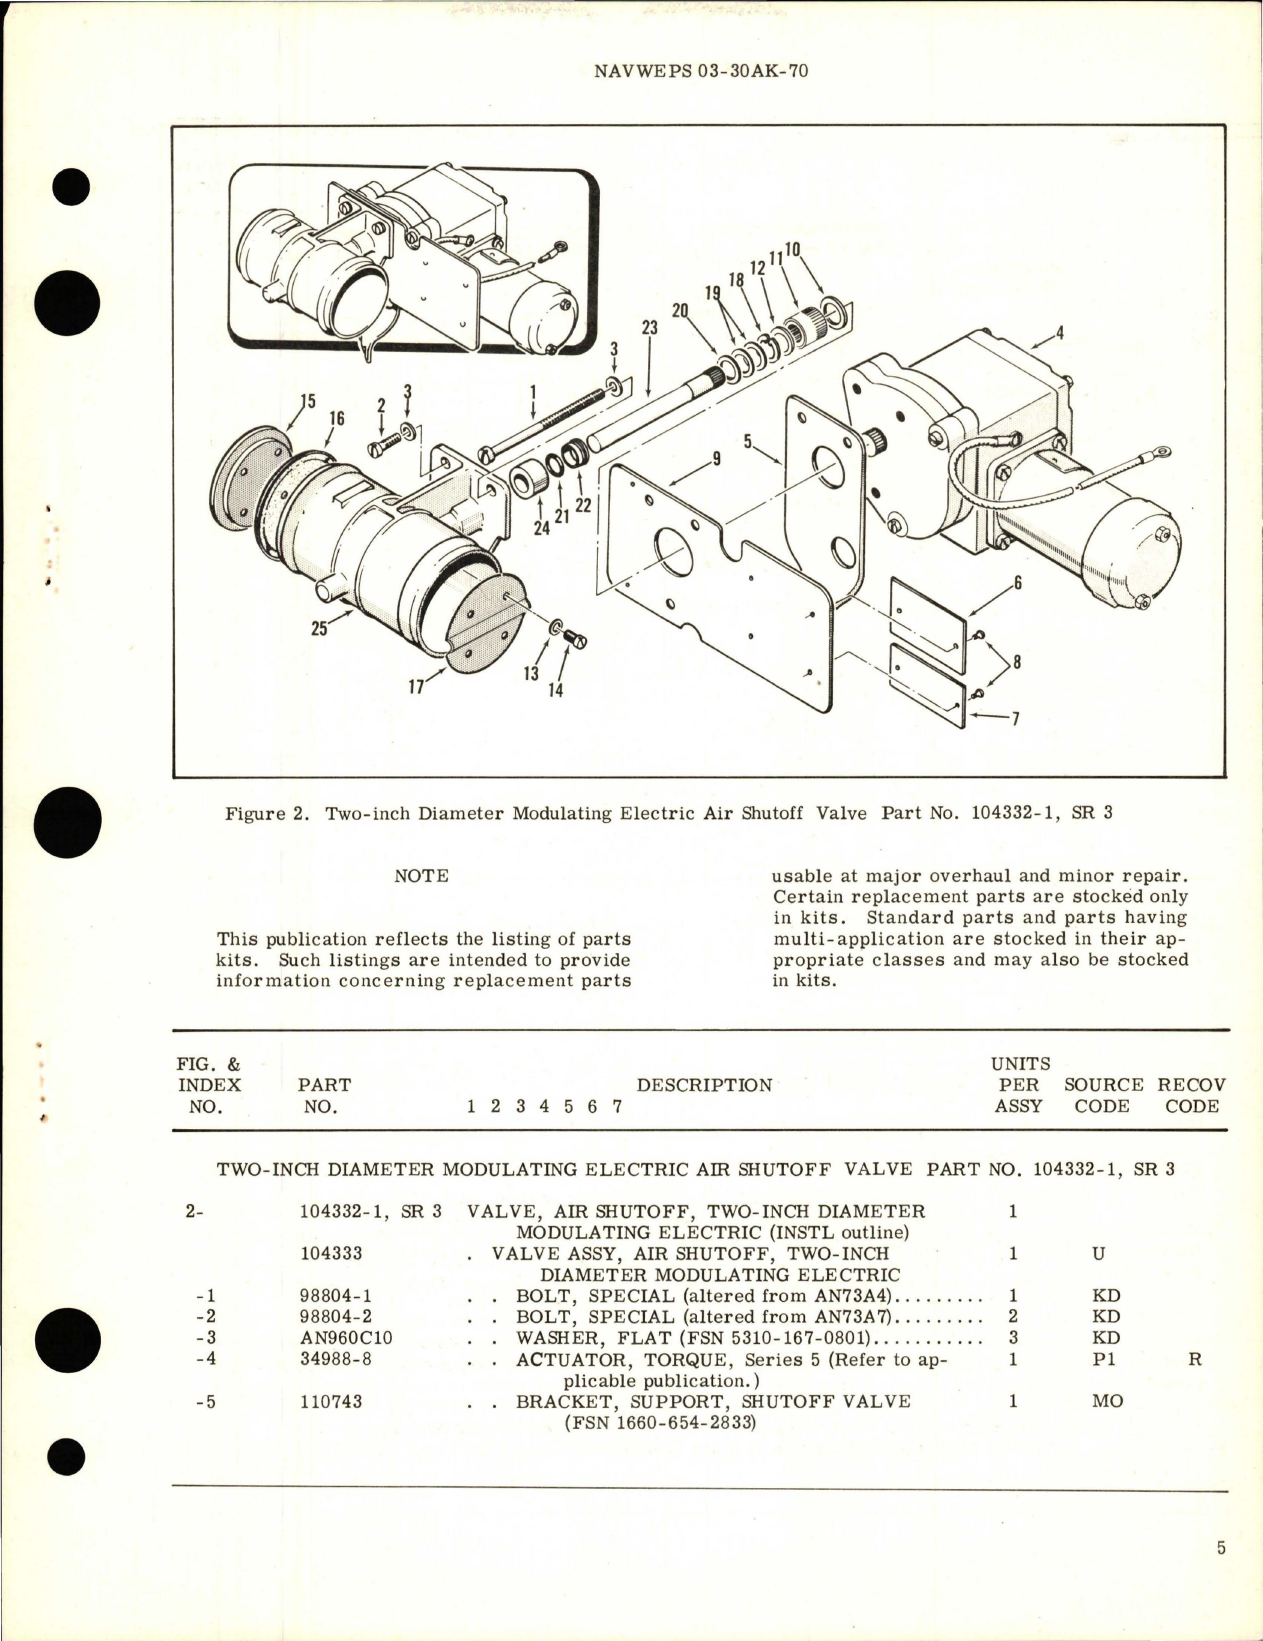 Sample page 5 from AirCorps Library document: Overhaul Instructions with Parts Breakdown for 2